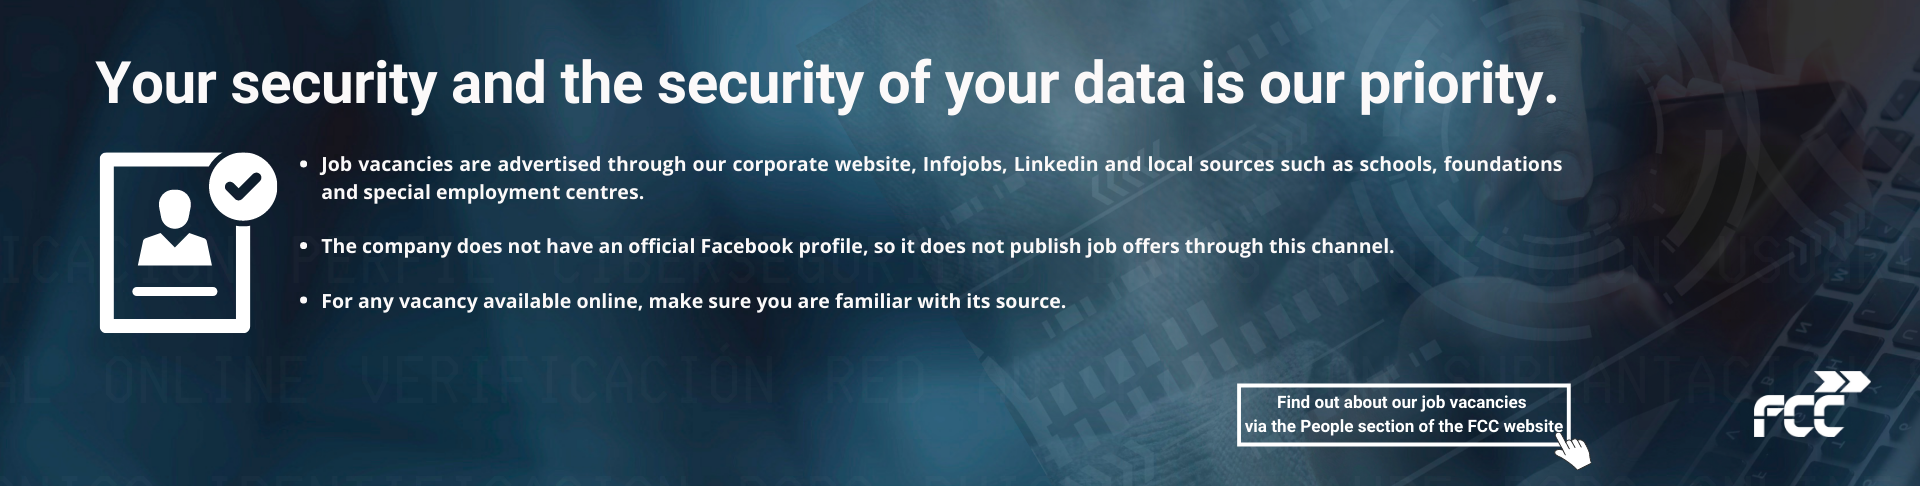 Your security and the security of your data is our priority (Opens people page in new tab)